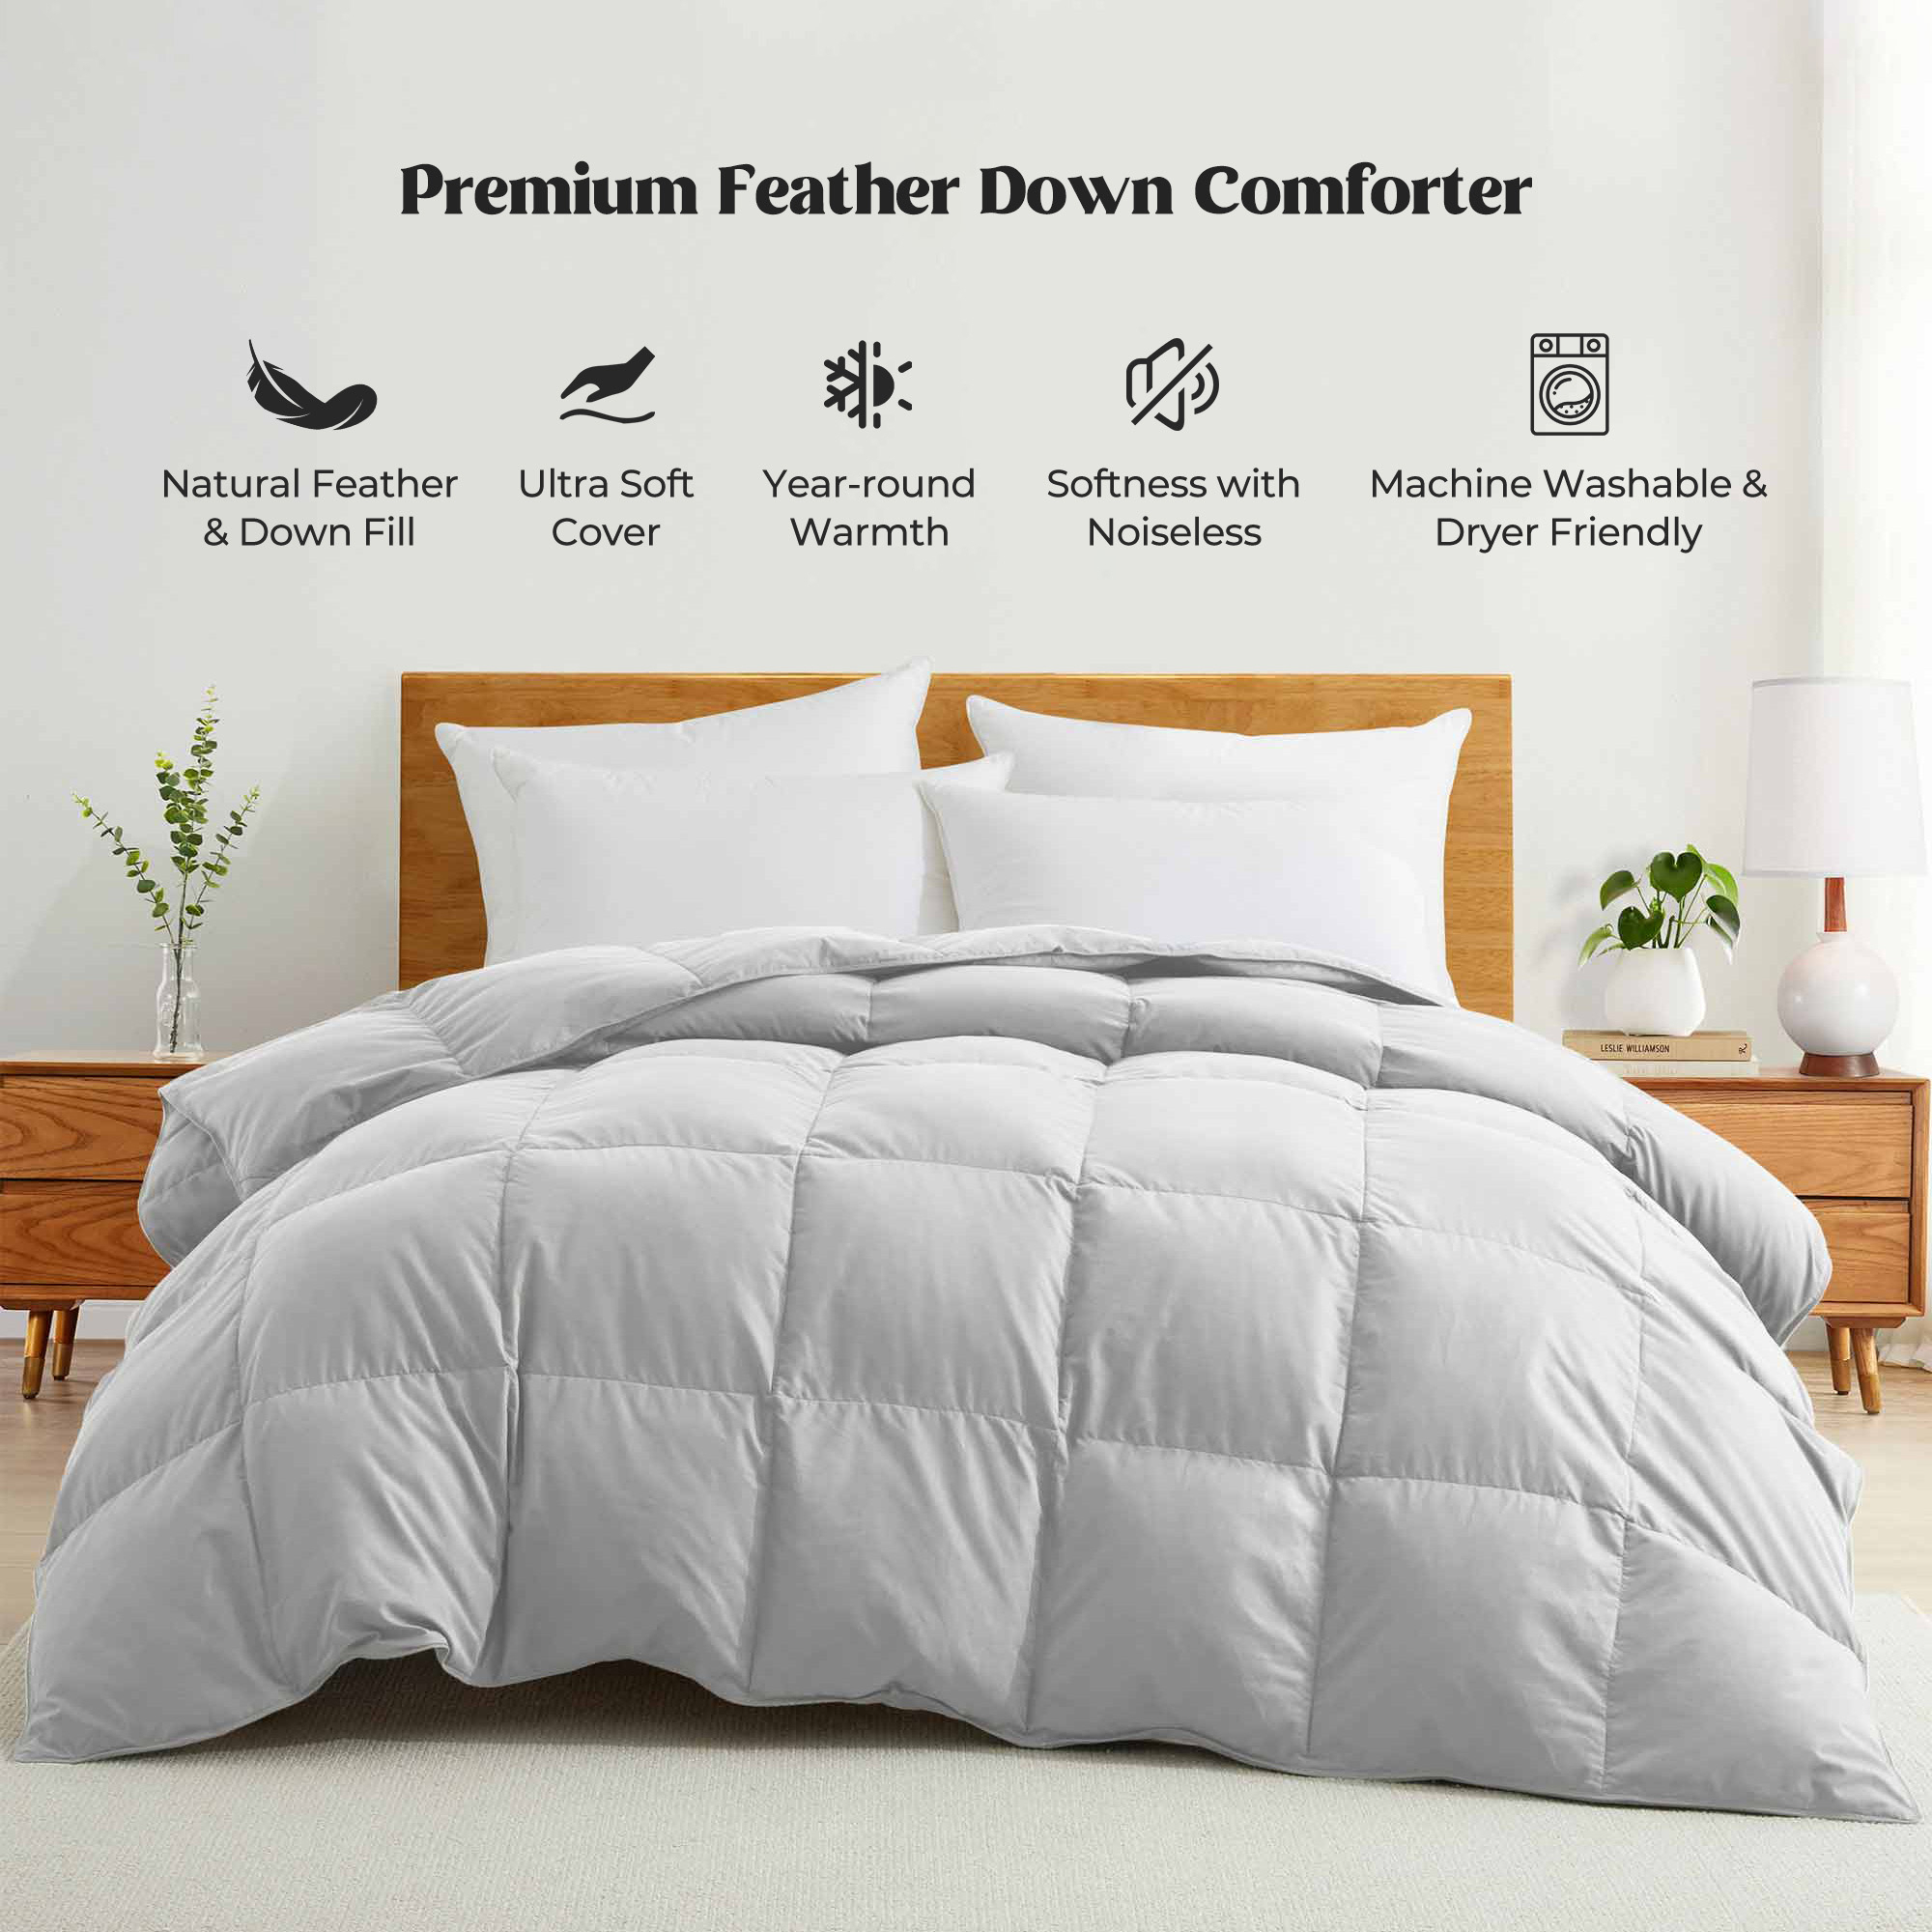 All Seasons Goose Down Feather Comforter Ultra Soft Comforter With Peach Skin Fabric - Nimbus Cloud, King-104*88